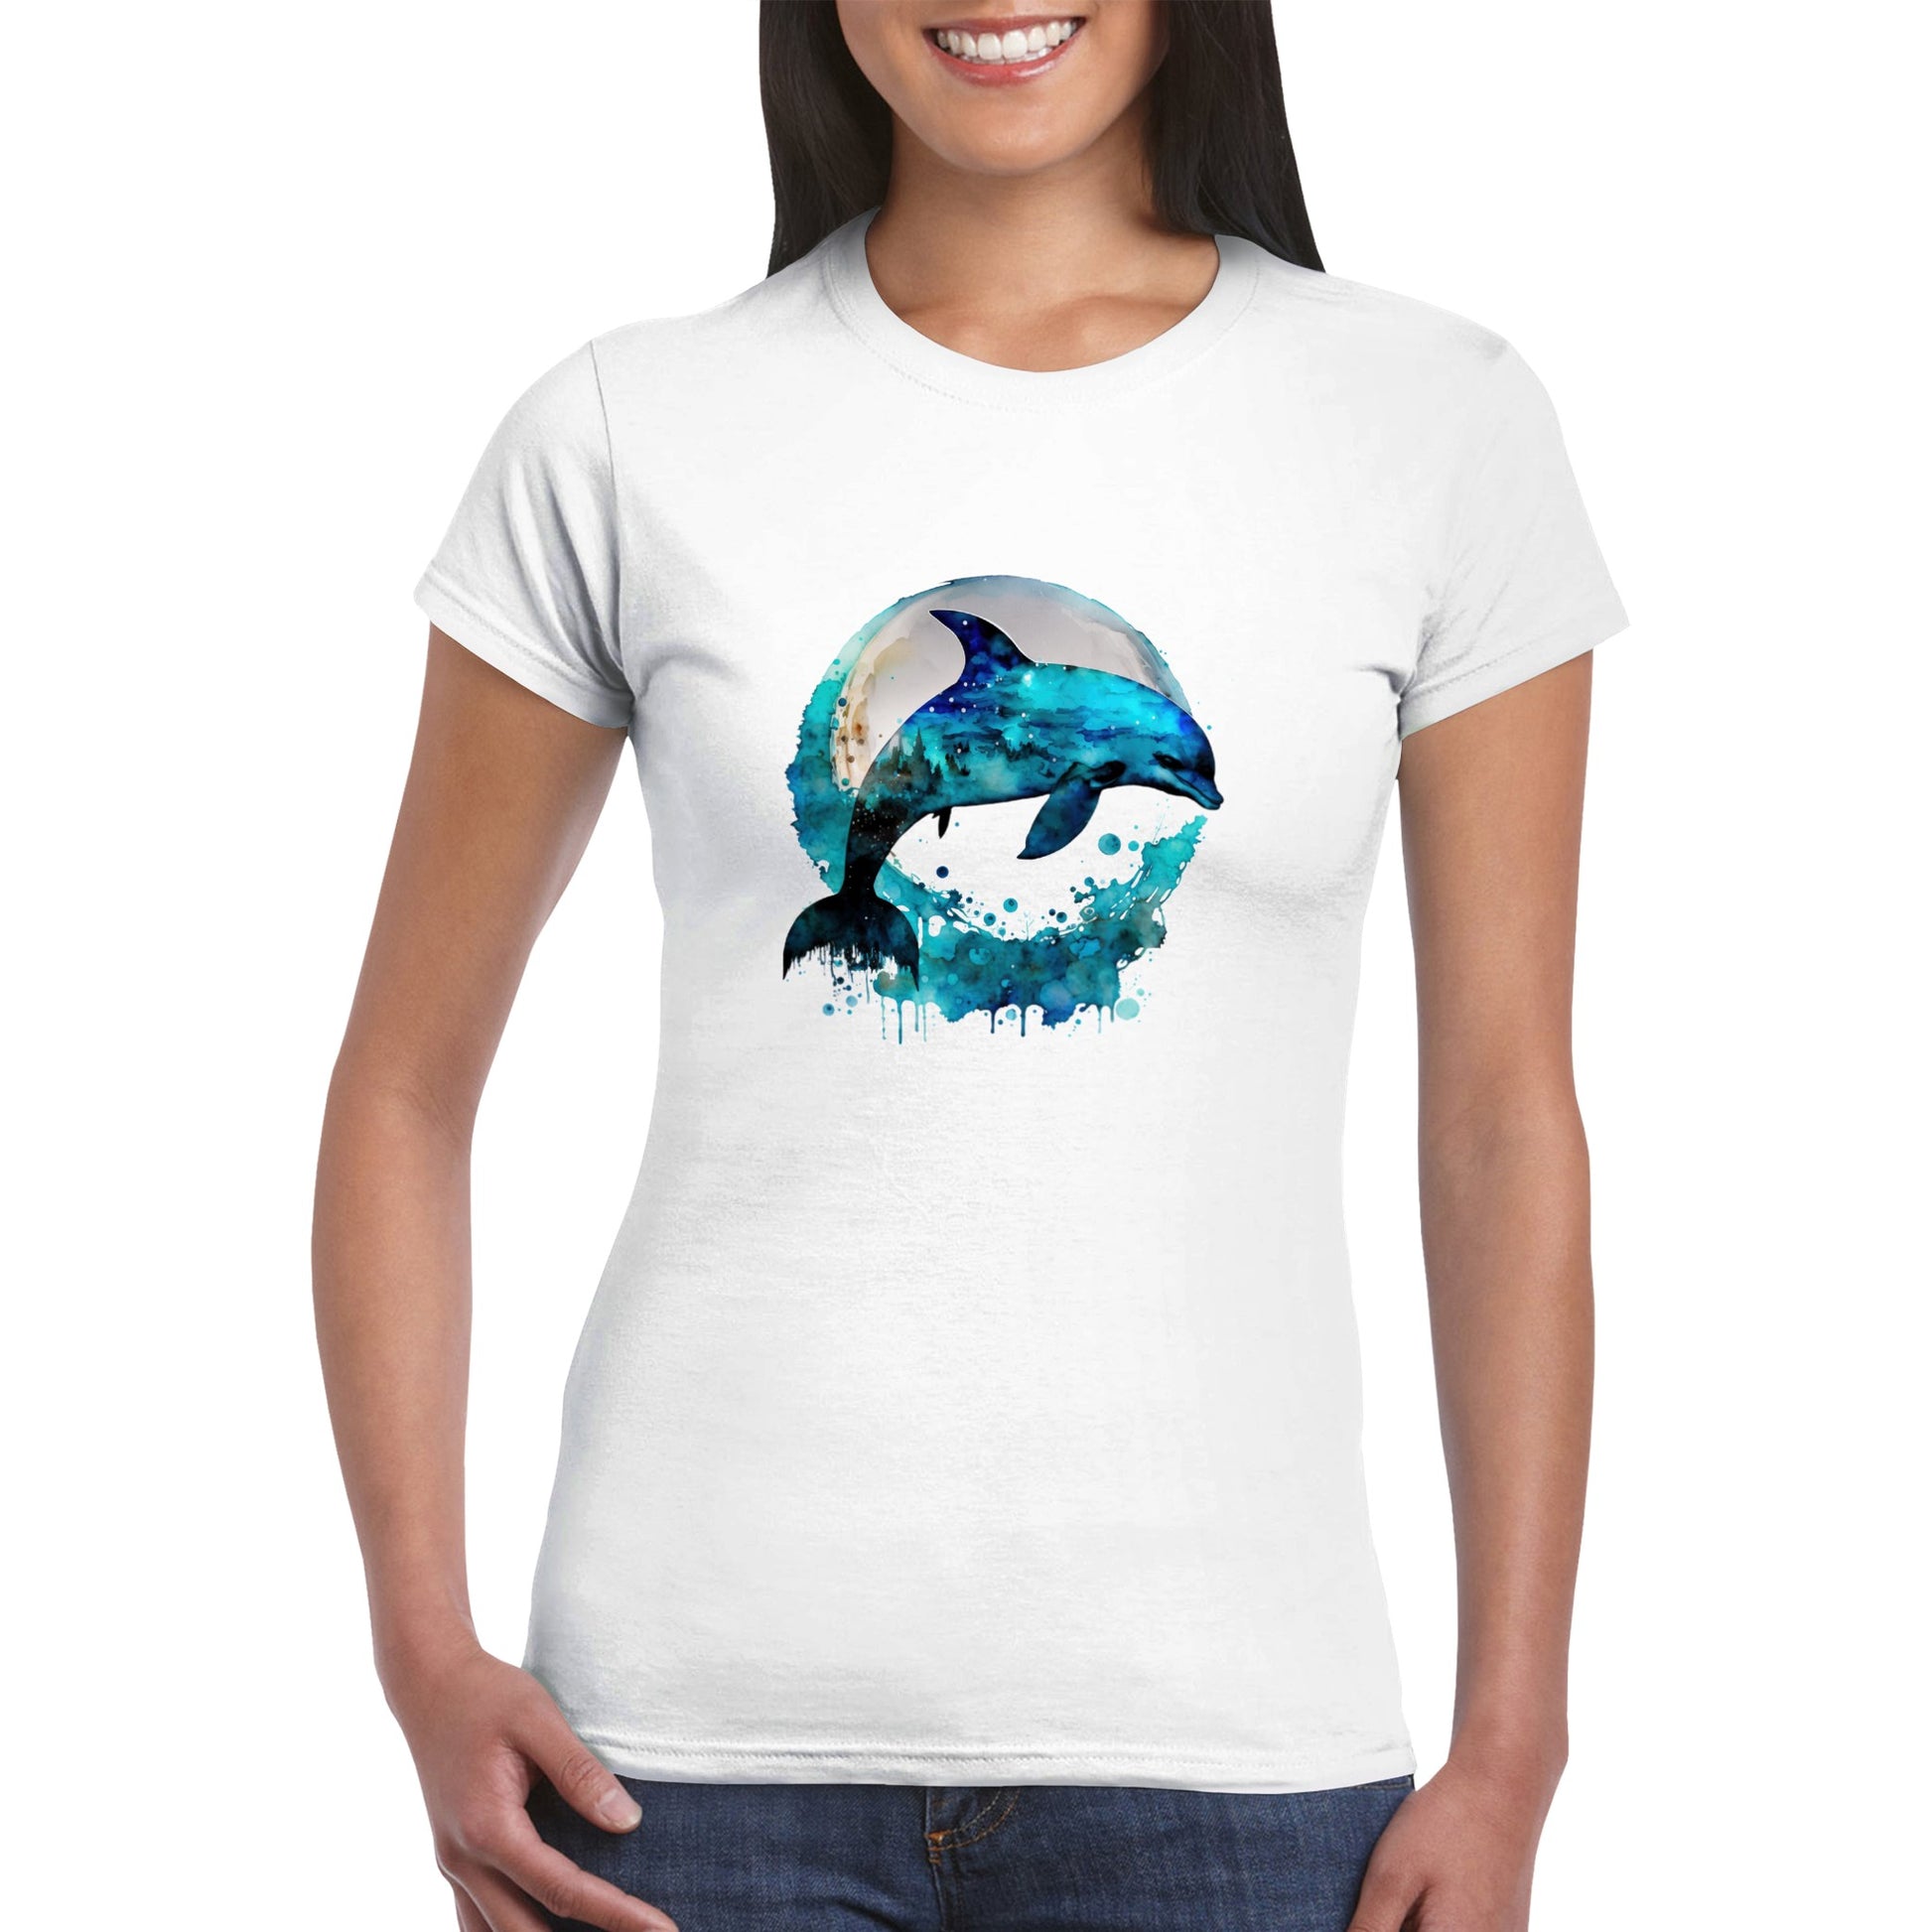 woman wearing a white t-shirt with a dolphin print